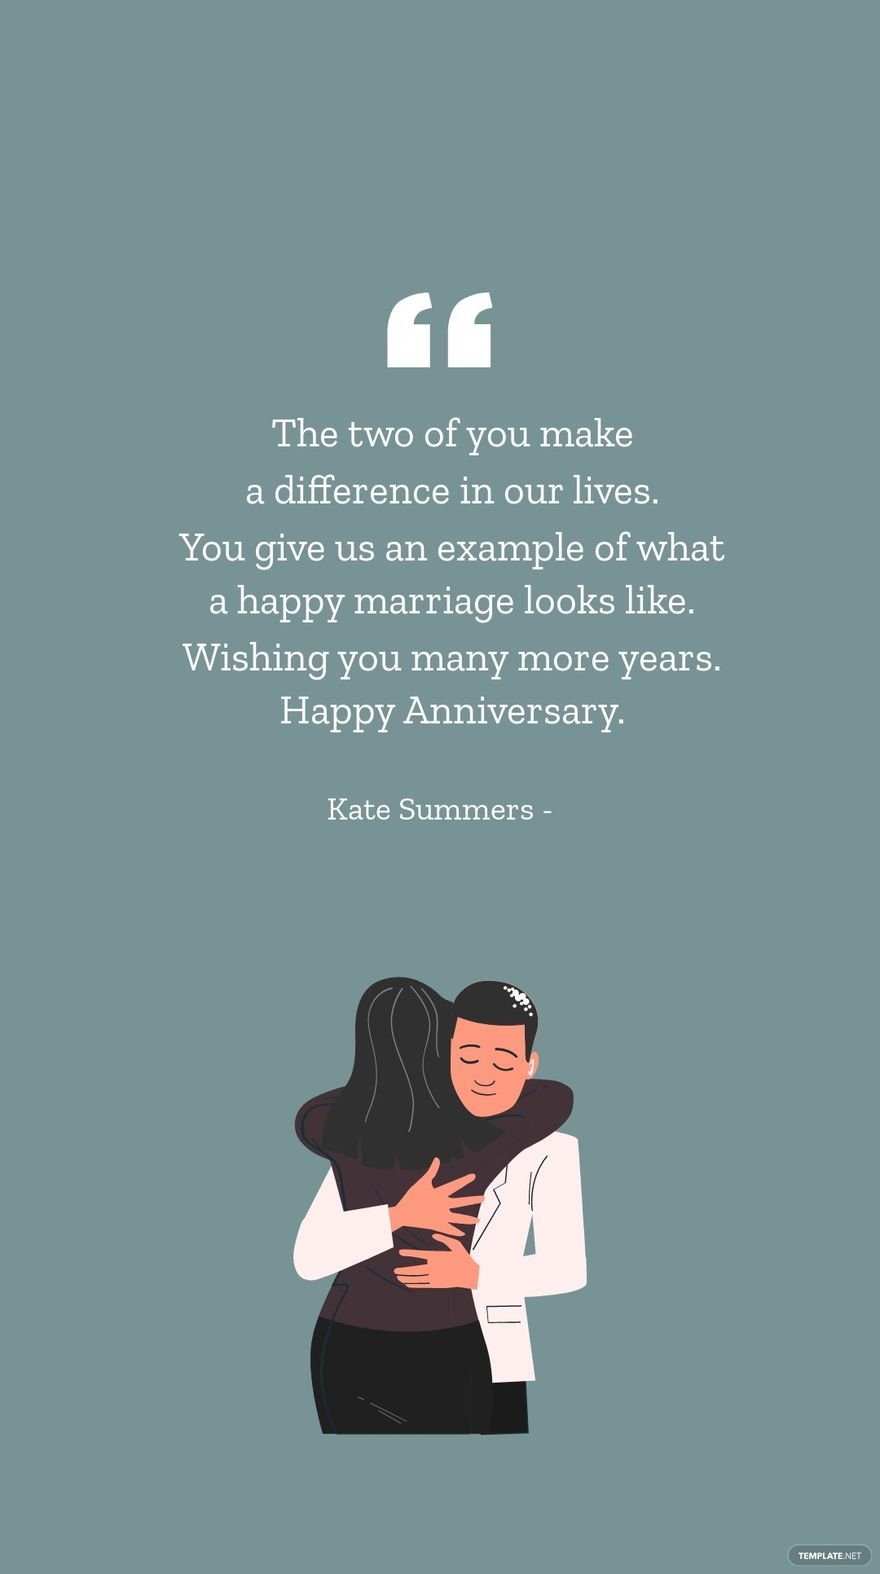 Kate Summers - The two of you make a difference in our lives. You give us an example of what a happy marriage looks like. Wishing you many more years. Happy Anniversary.